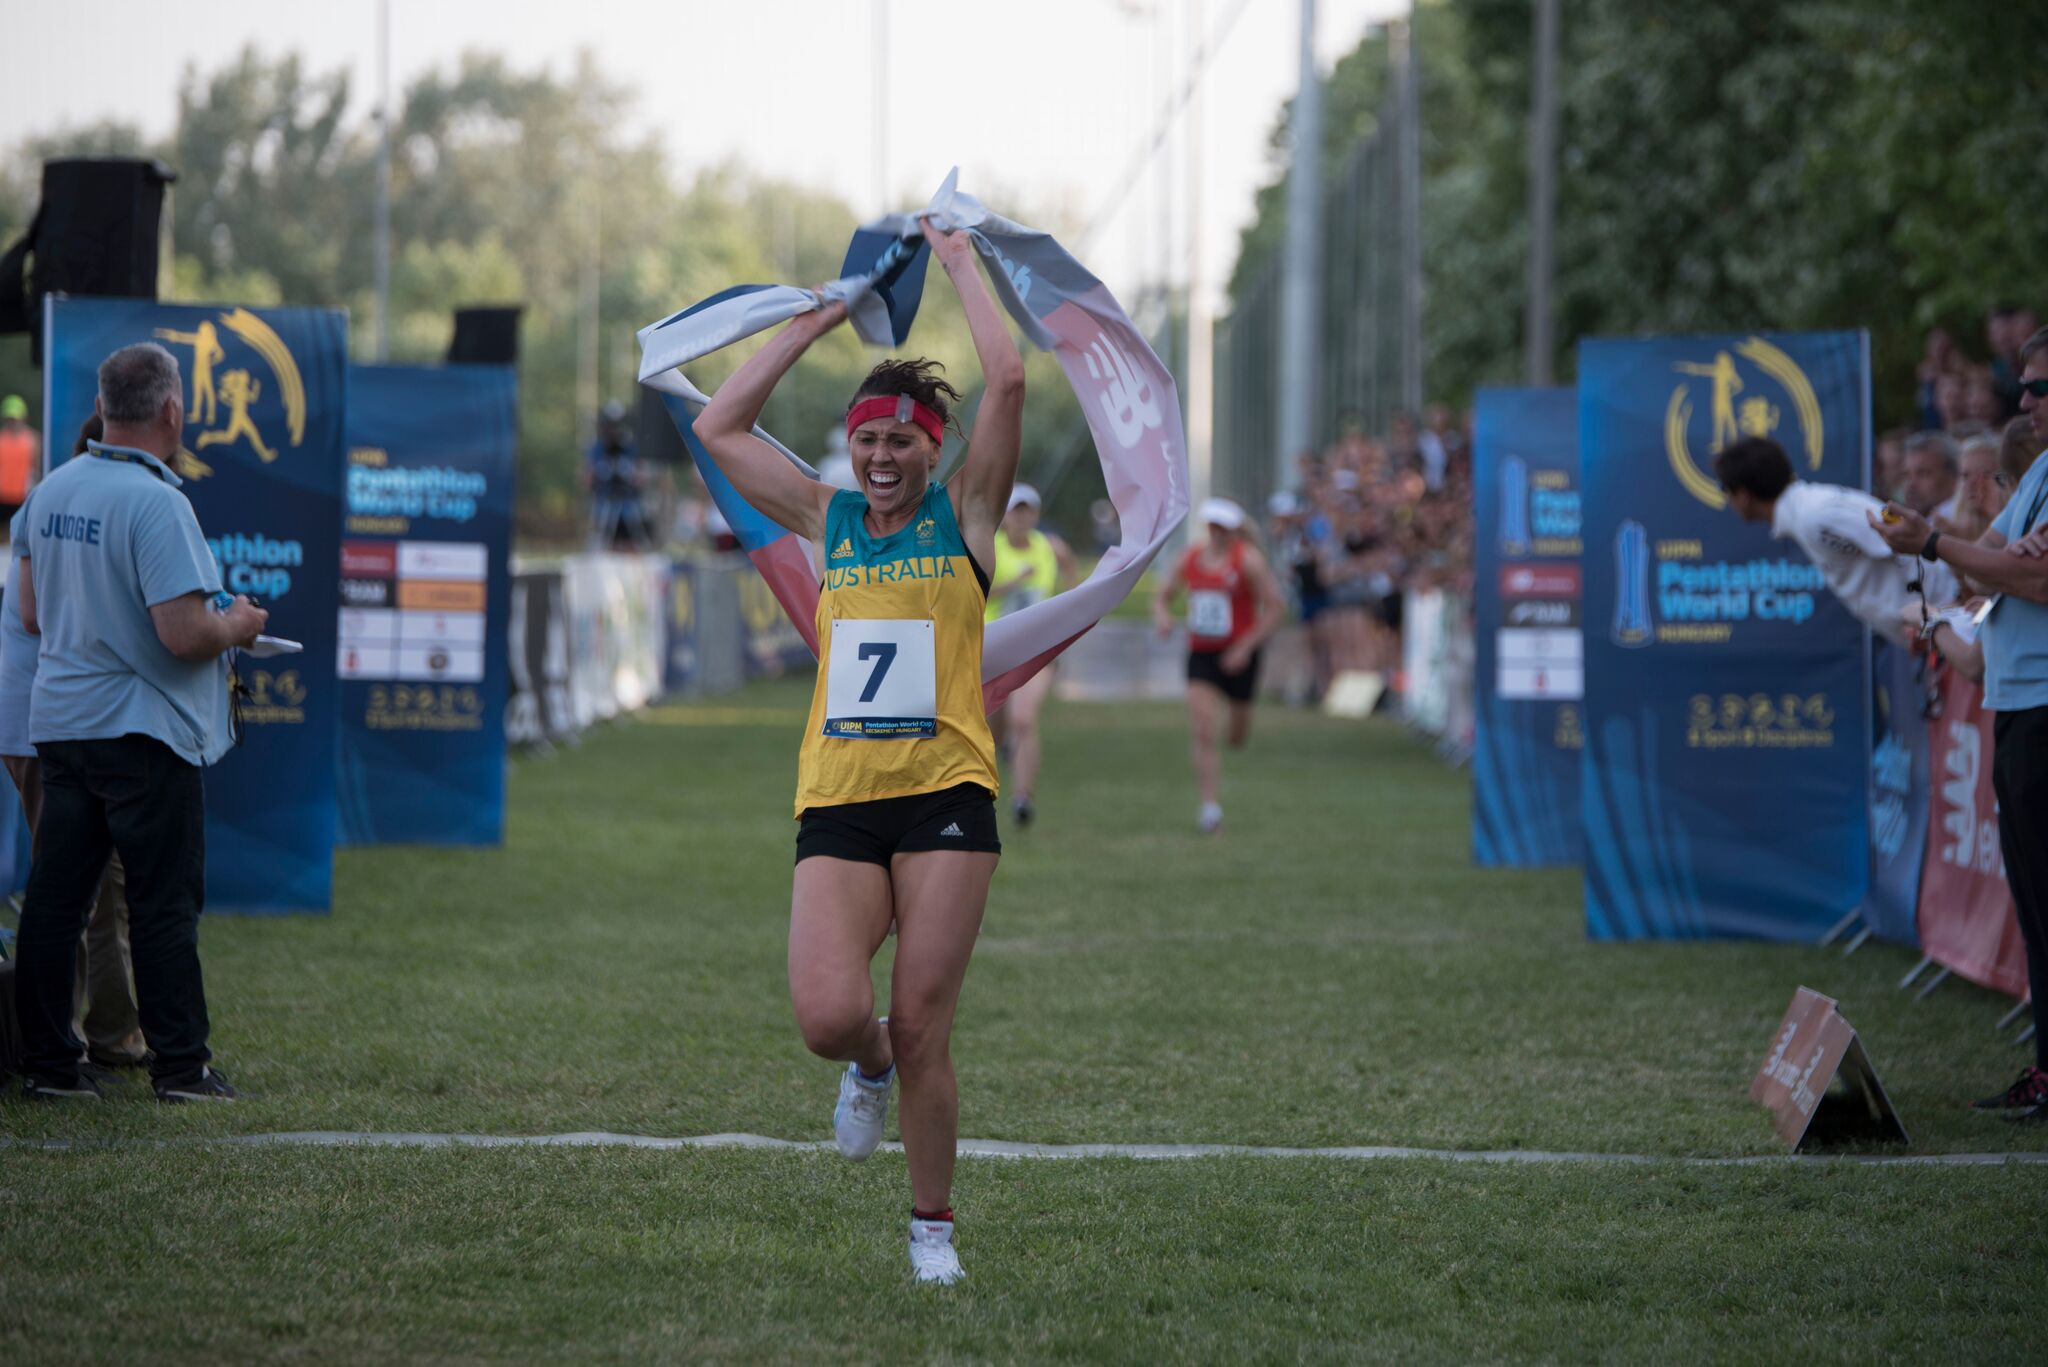 Chloe Esposito triumphed in the women's final in Hungary ©UIPM